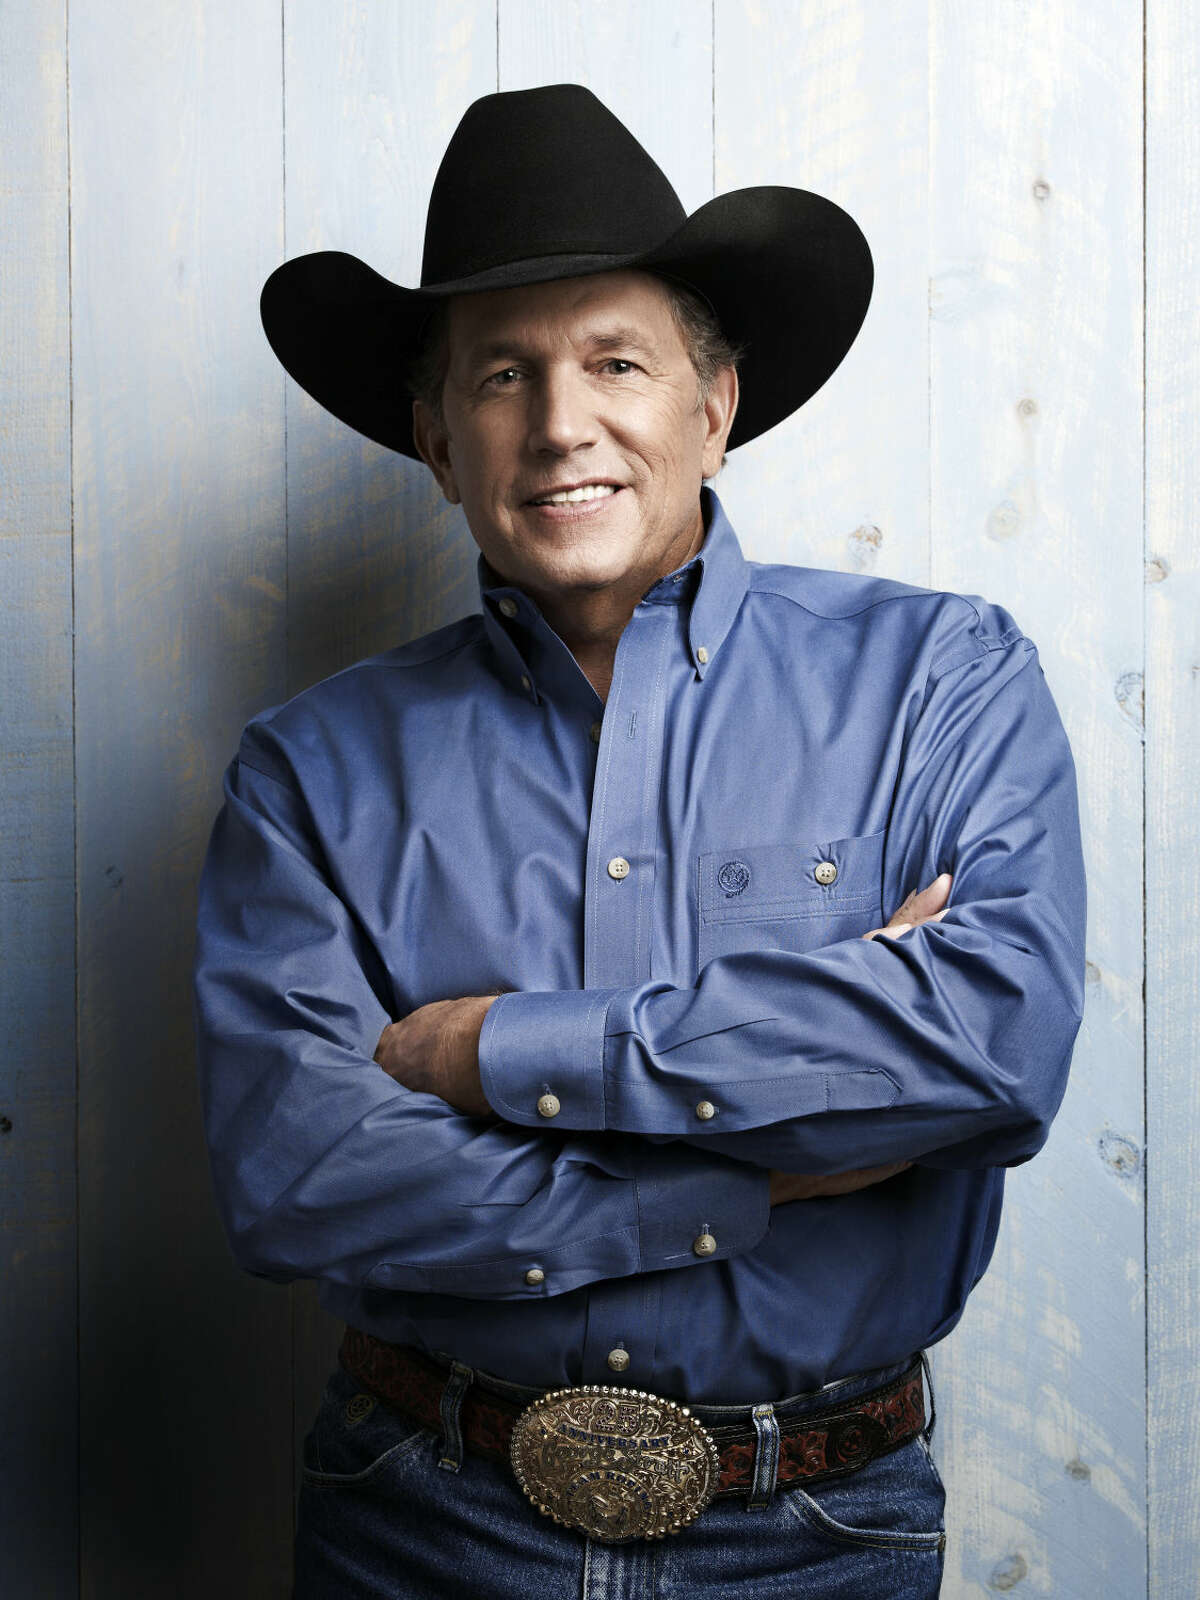 First, there's Strait himself. In the '70s, before he was a successful solo artist, Strait wrote much of the material for his Ace in the Hole Band, including “That Don’t Change The Way I Feel About You,” and “I Can’t Go On Dying Like This,” which were released on the Houston-based D Records label. He's been writing again lately - each of his past two albums has a pair of co-writes with his son Bubba.